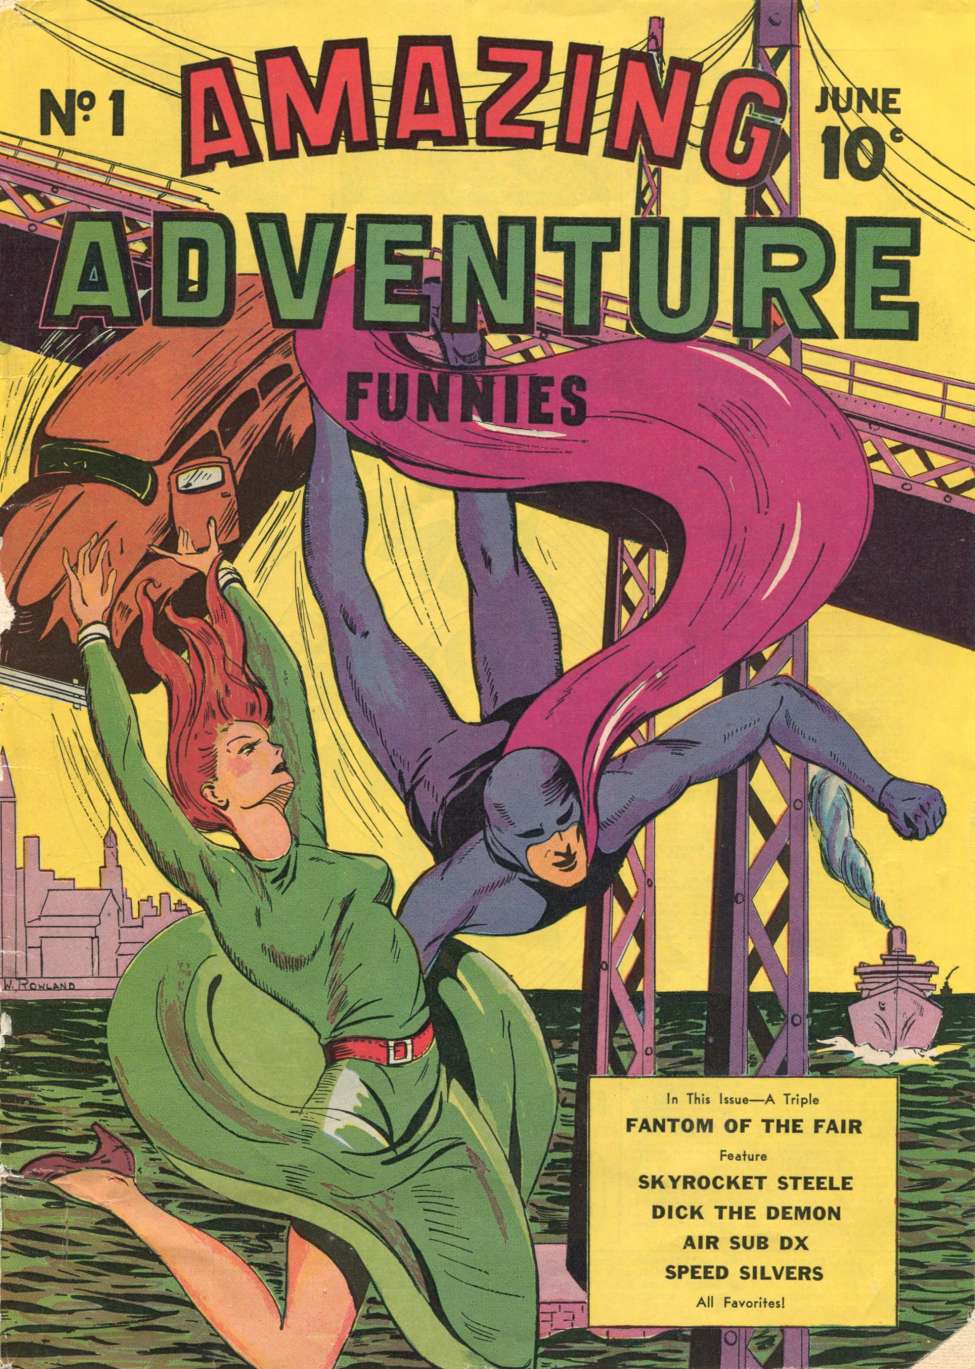 Book Cover For Amazing Adventure Funnies 1